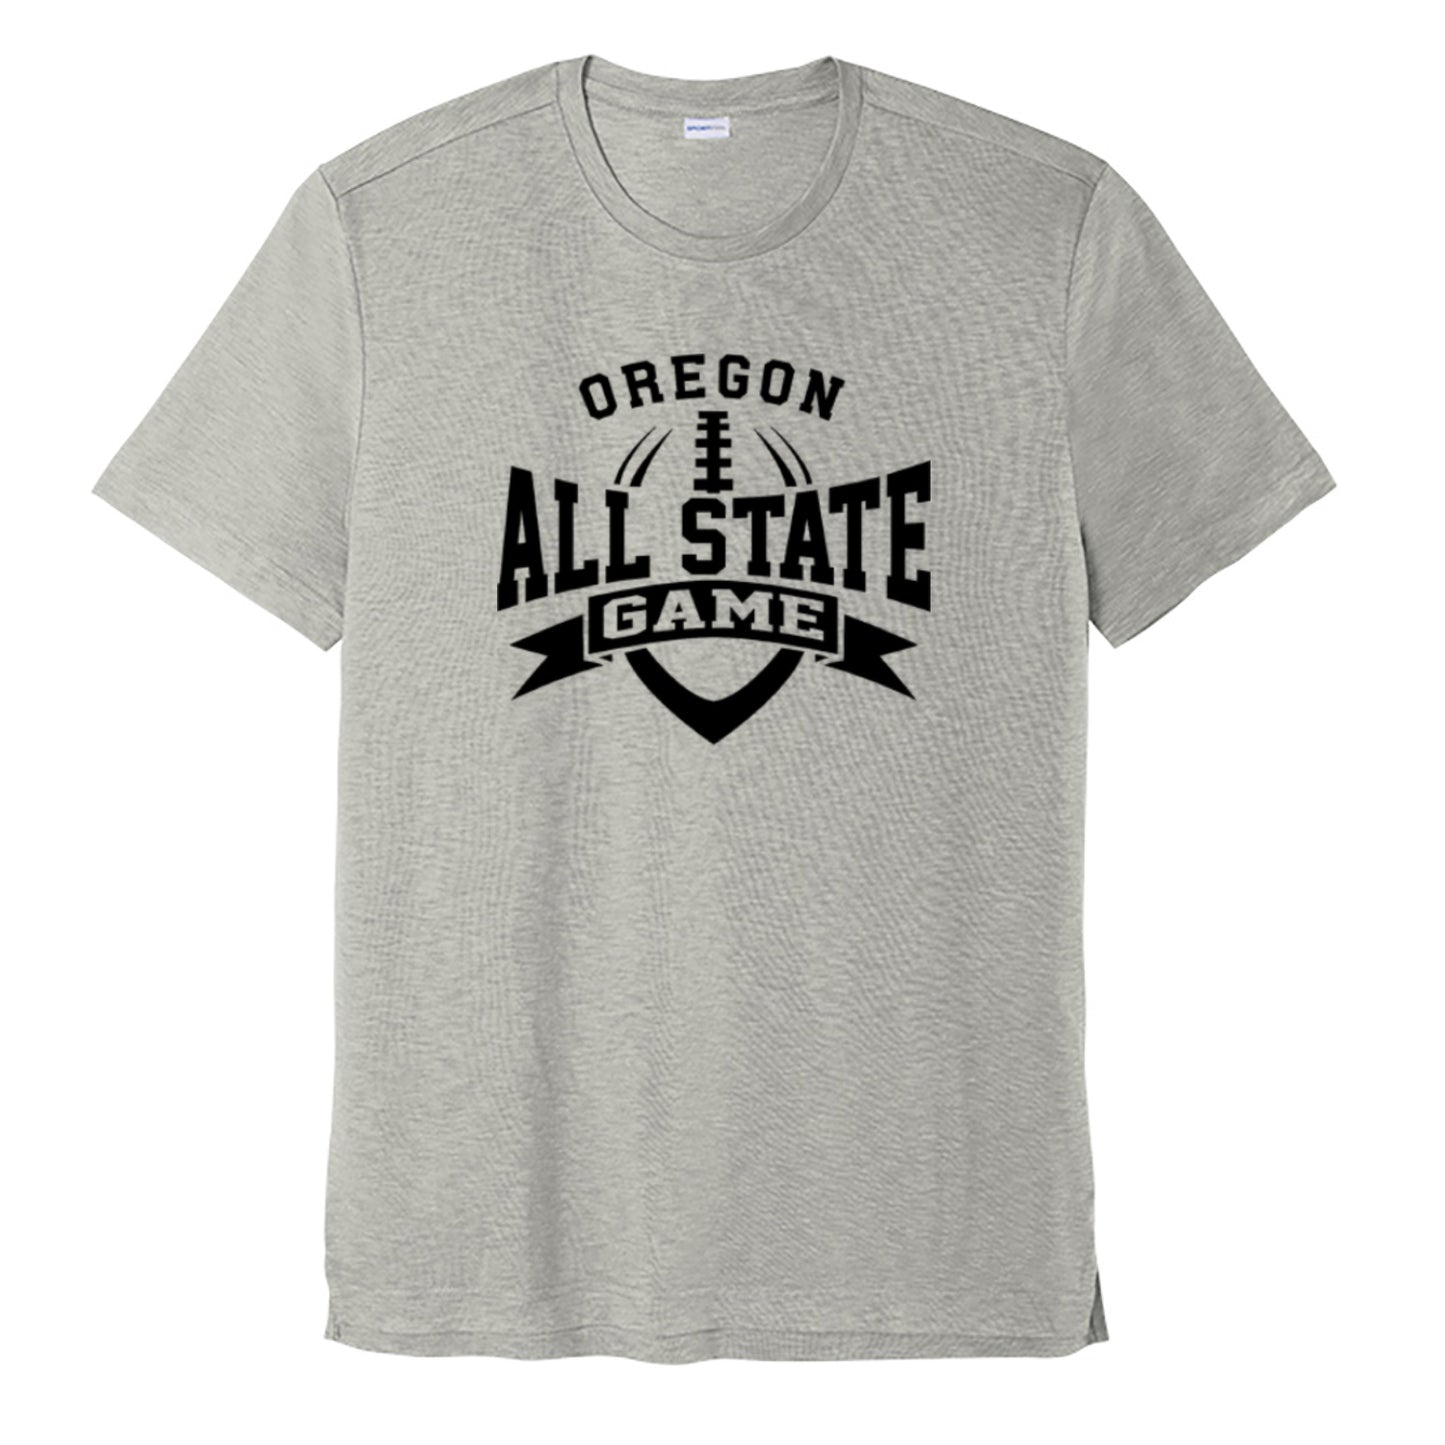 Oregon All State - Polyester Blend Tee - 4 colors available